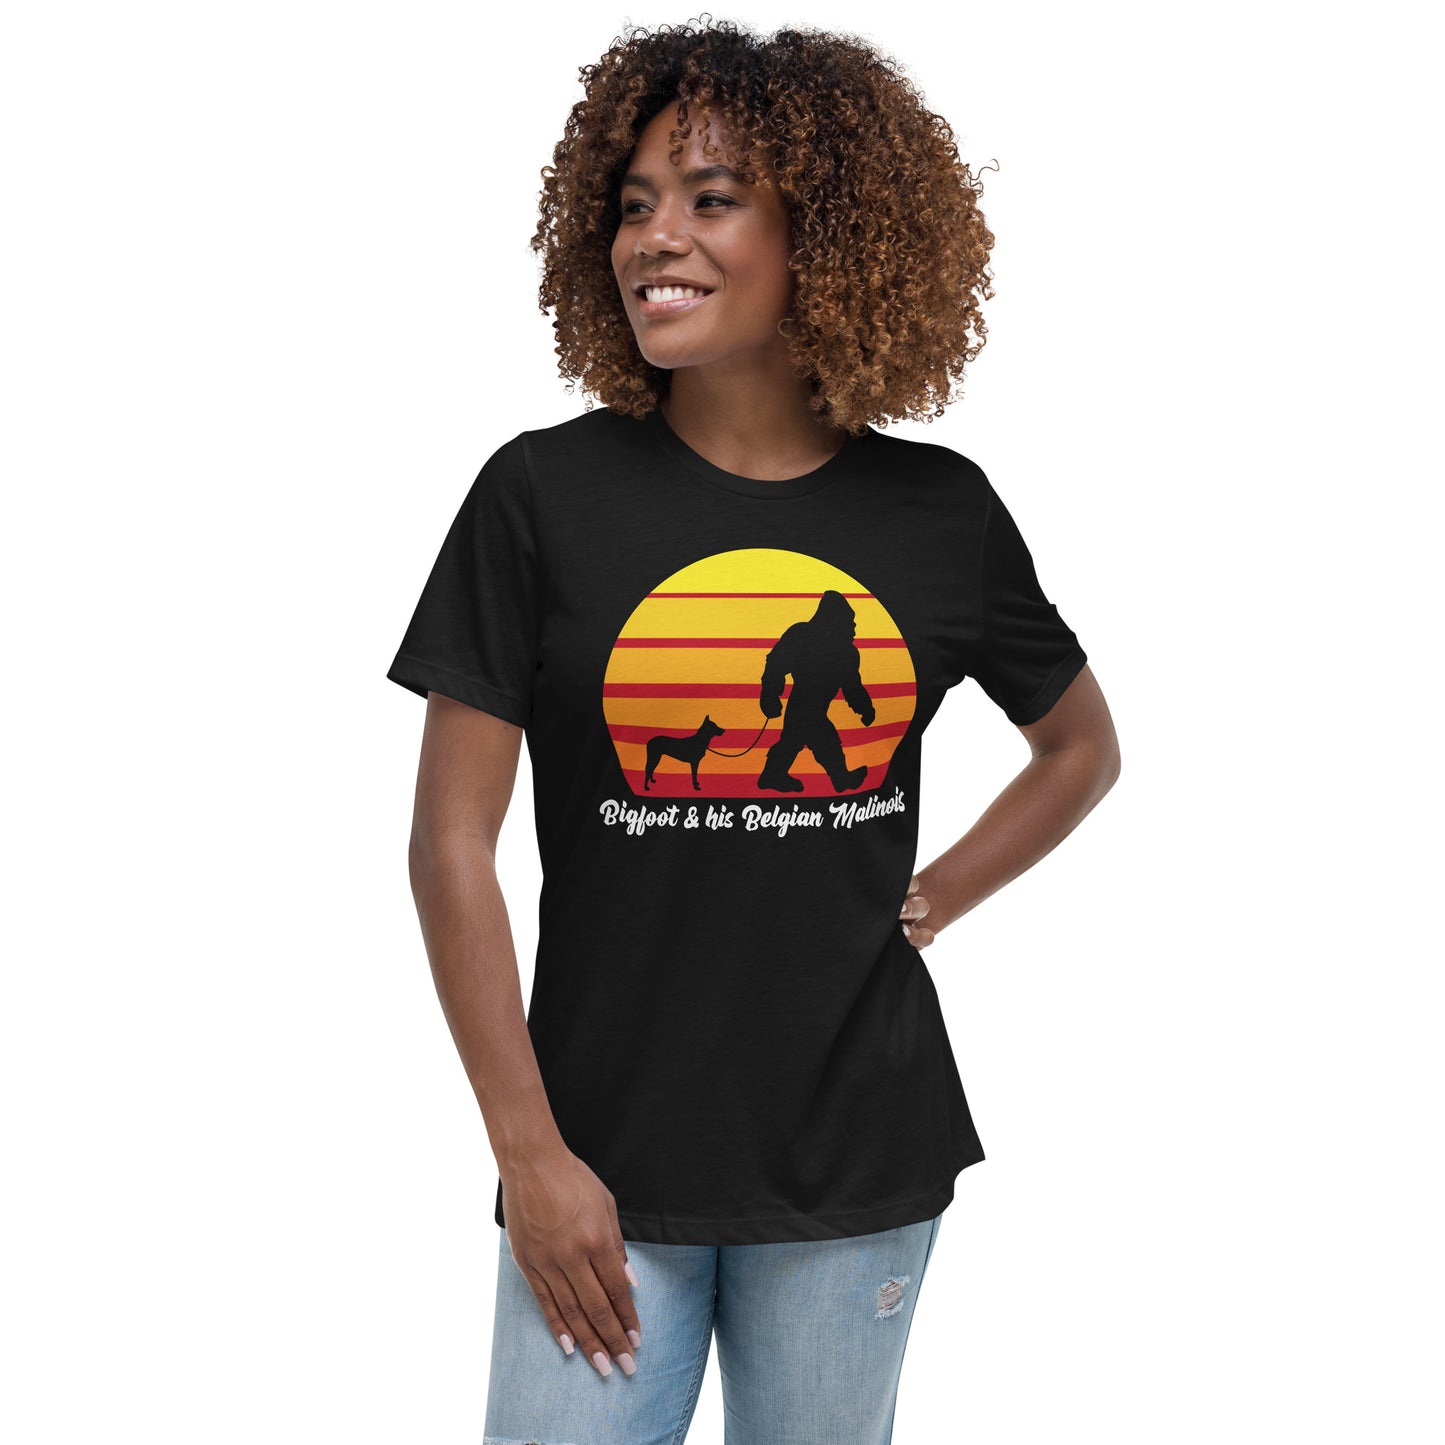 Big foot and his Belgian Malinois women’s black t-shirt by Dog Artistry.